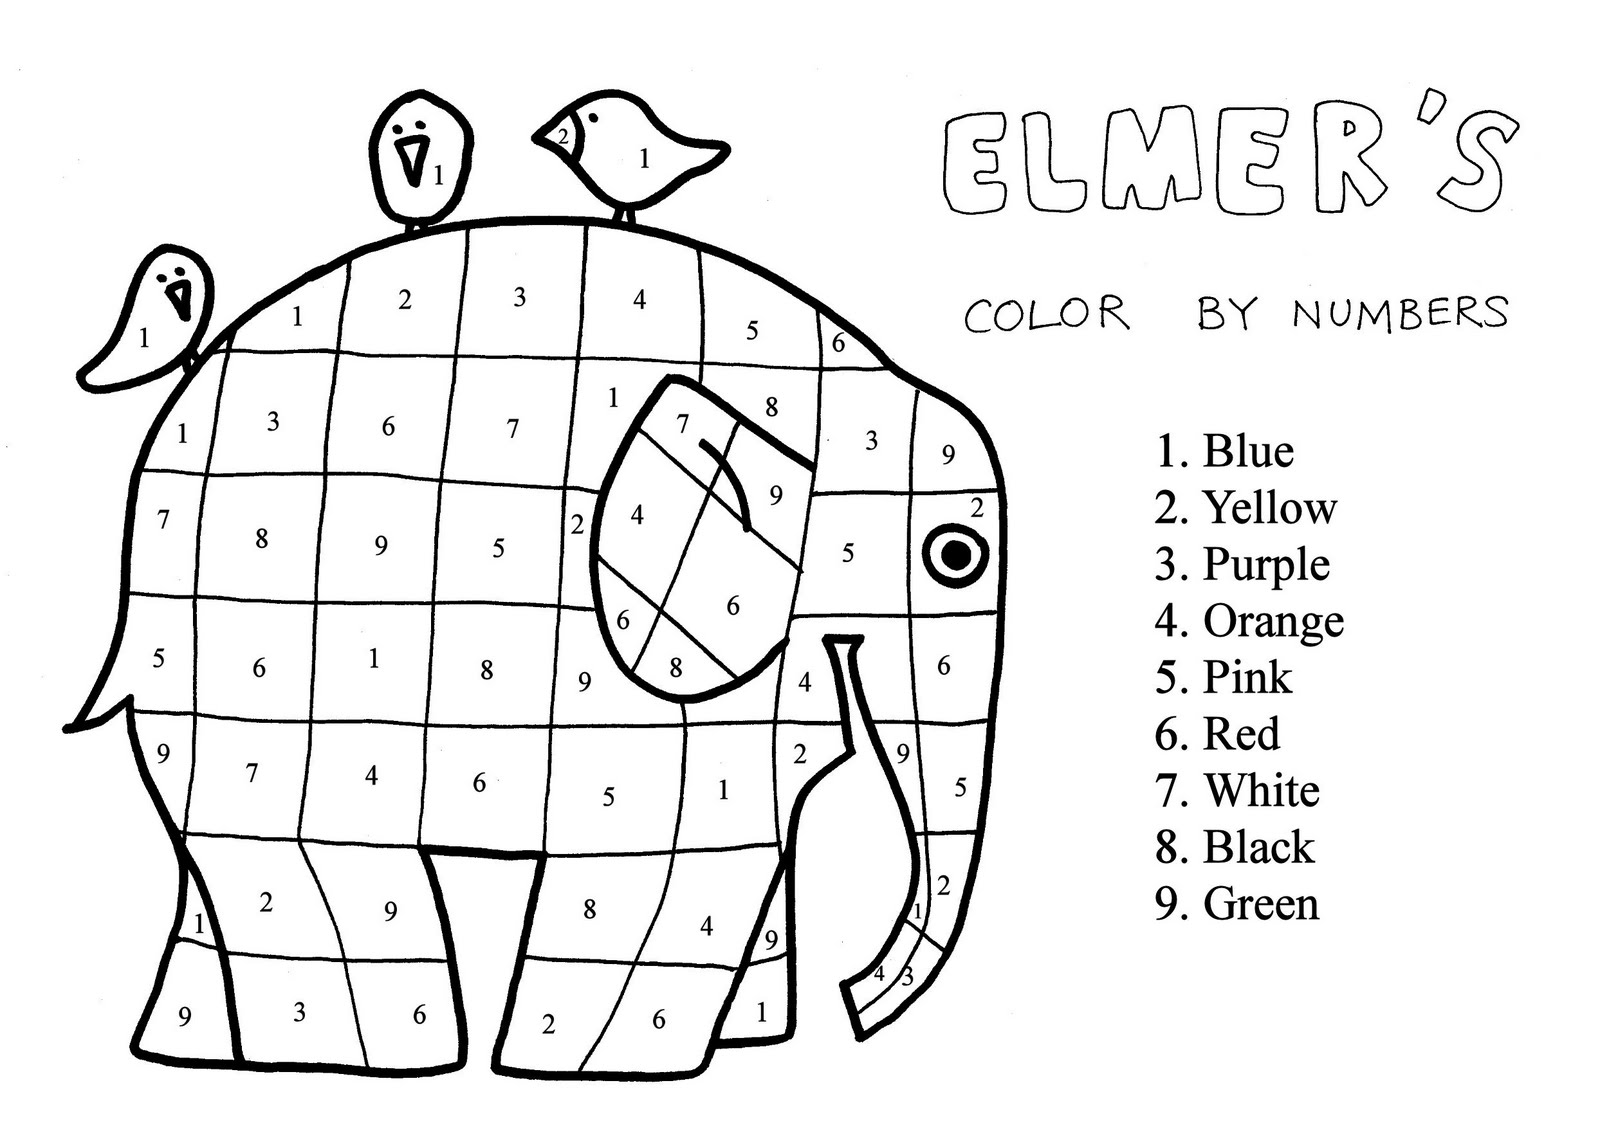 Coloring by numbers #125556 (Educational) – Printable coloring pages